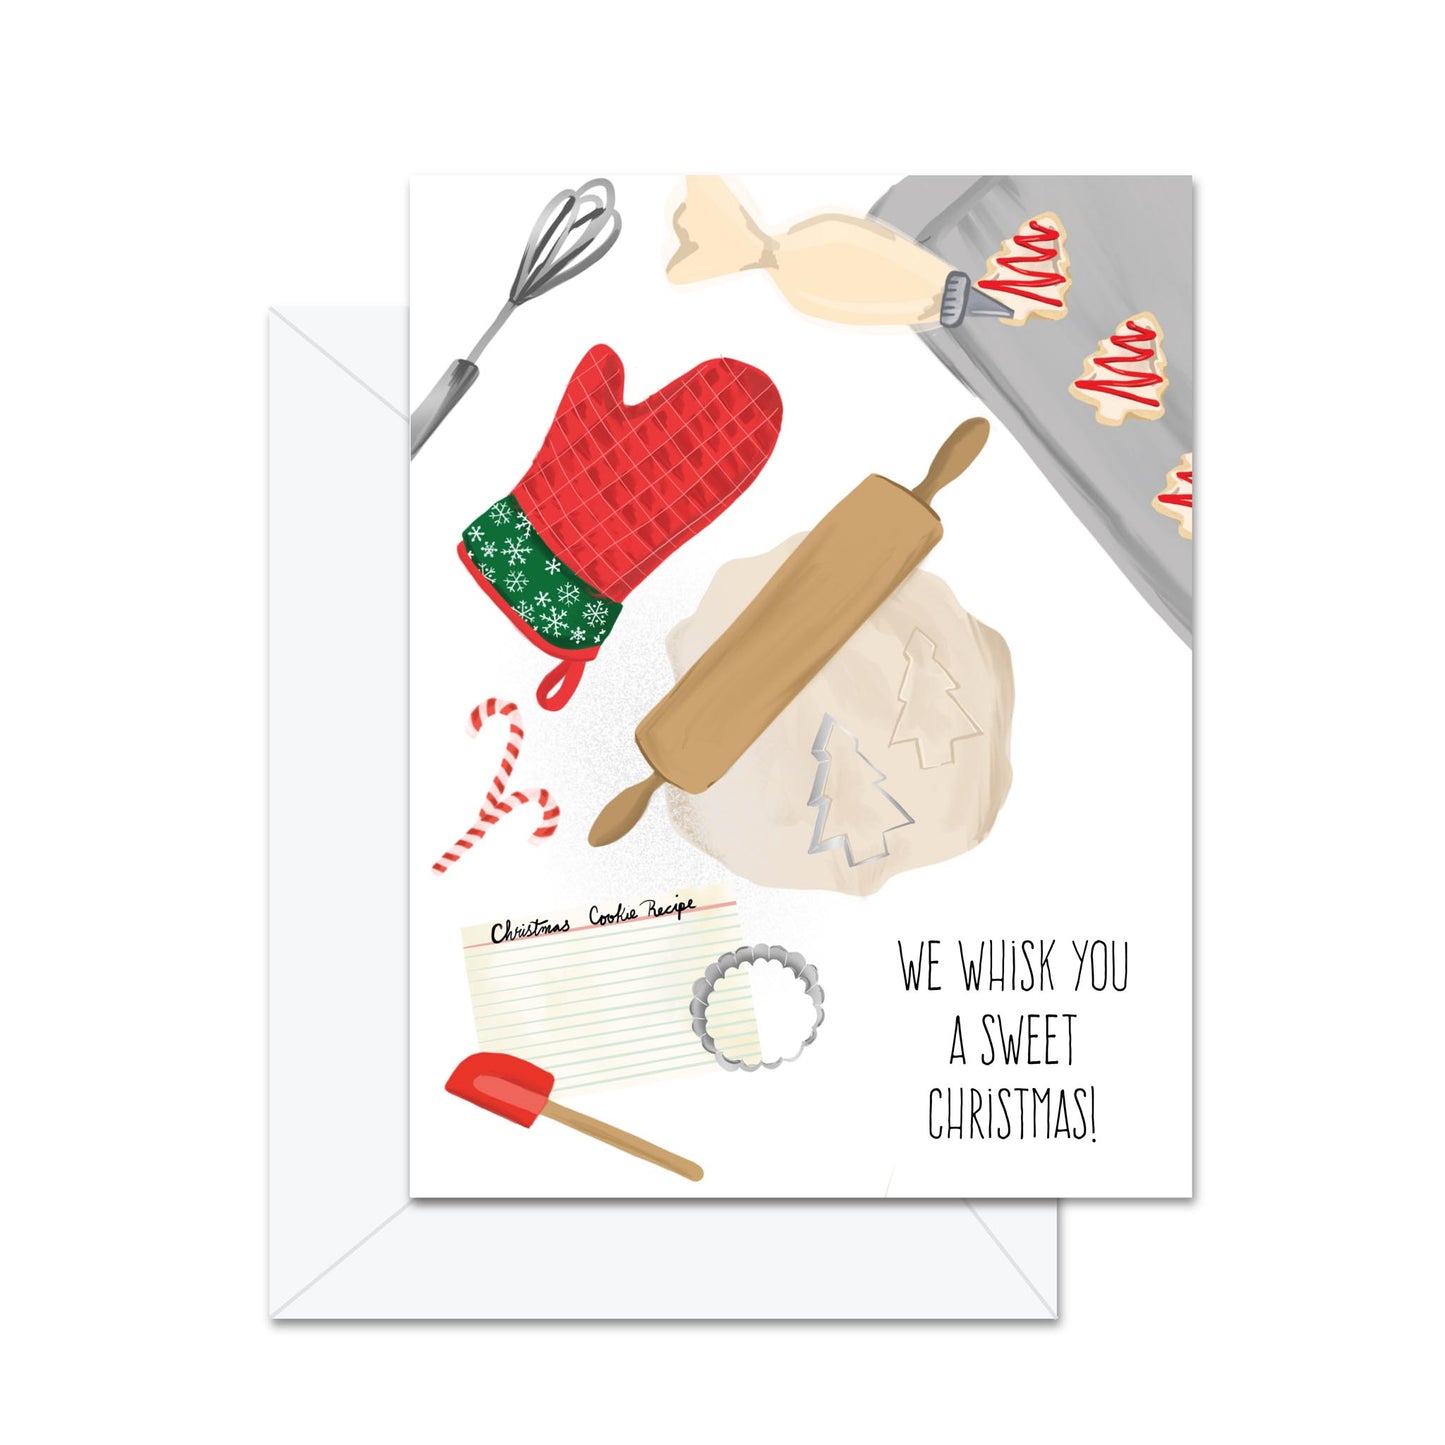 We Whisk You A Sweet Christmas! - Greeting Card